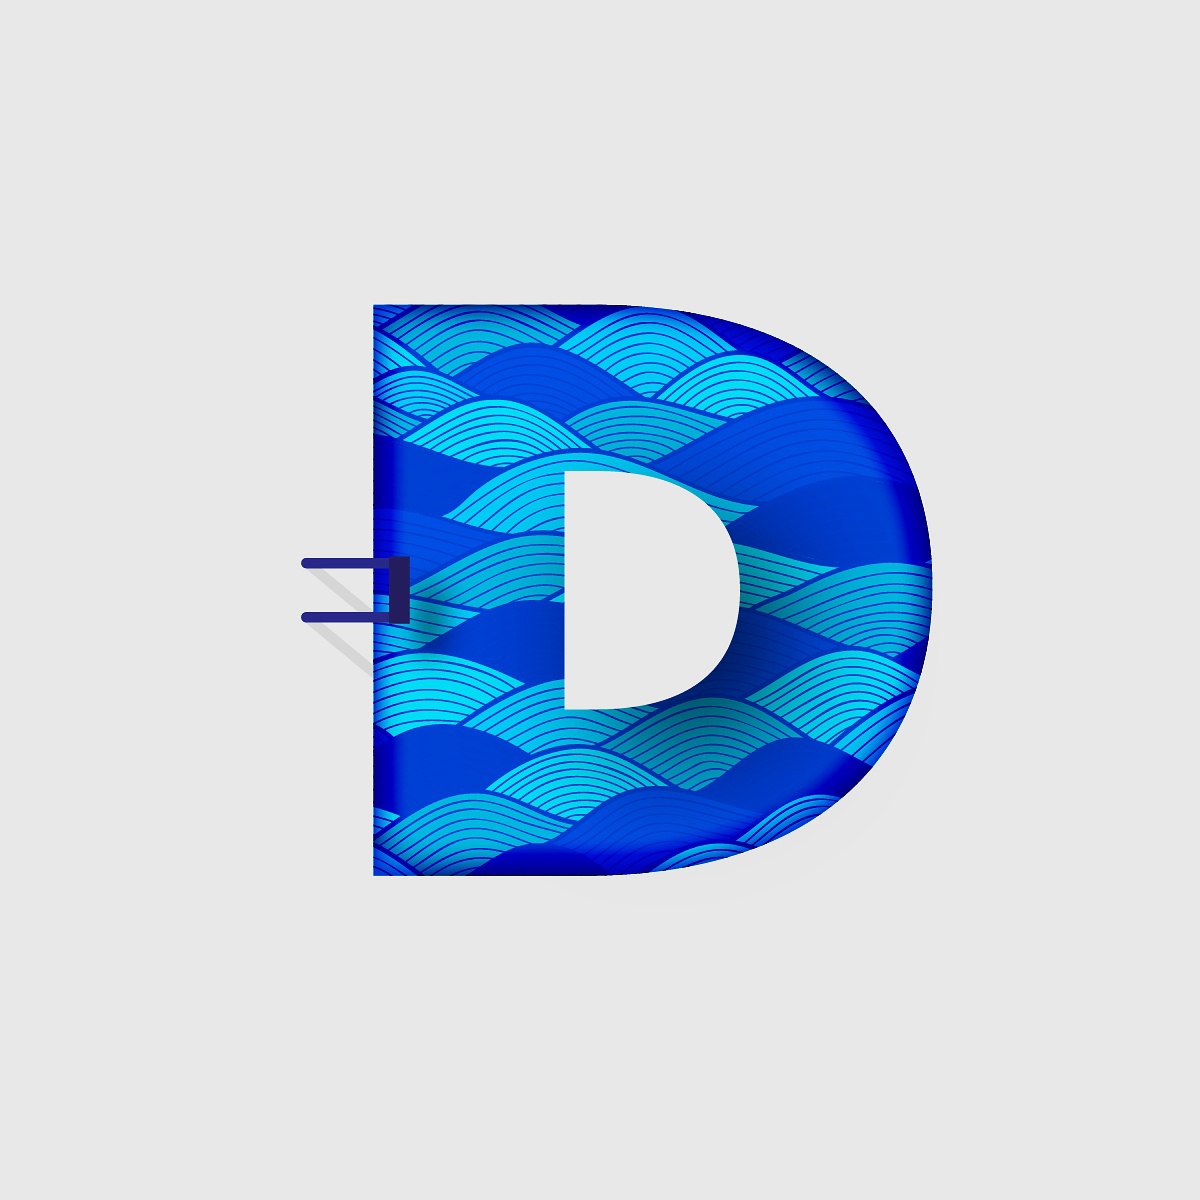 36daysoftype alphabets numbers type lettering Experimentation dailyproject instagram font design digital vector Icon